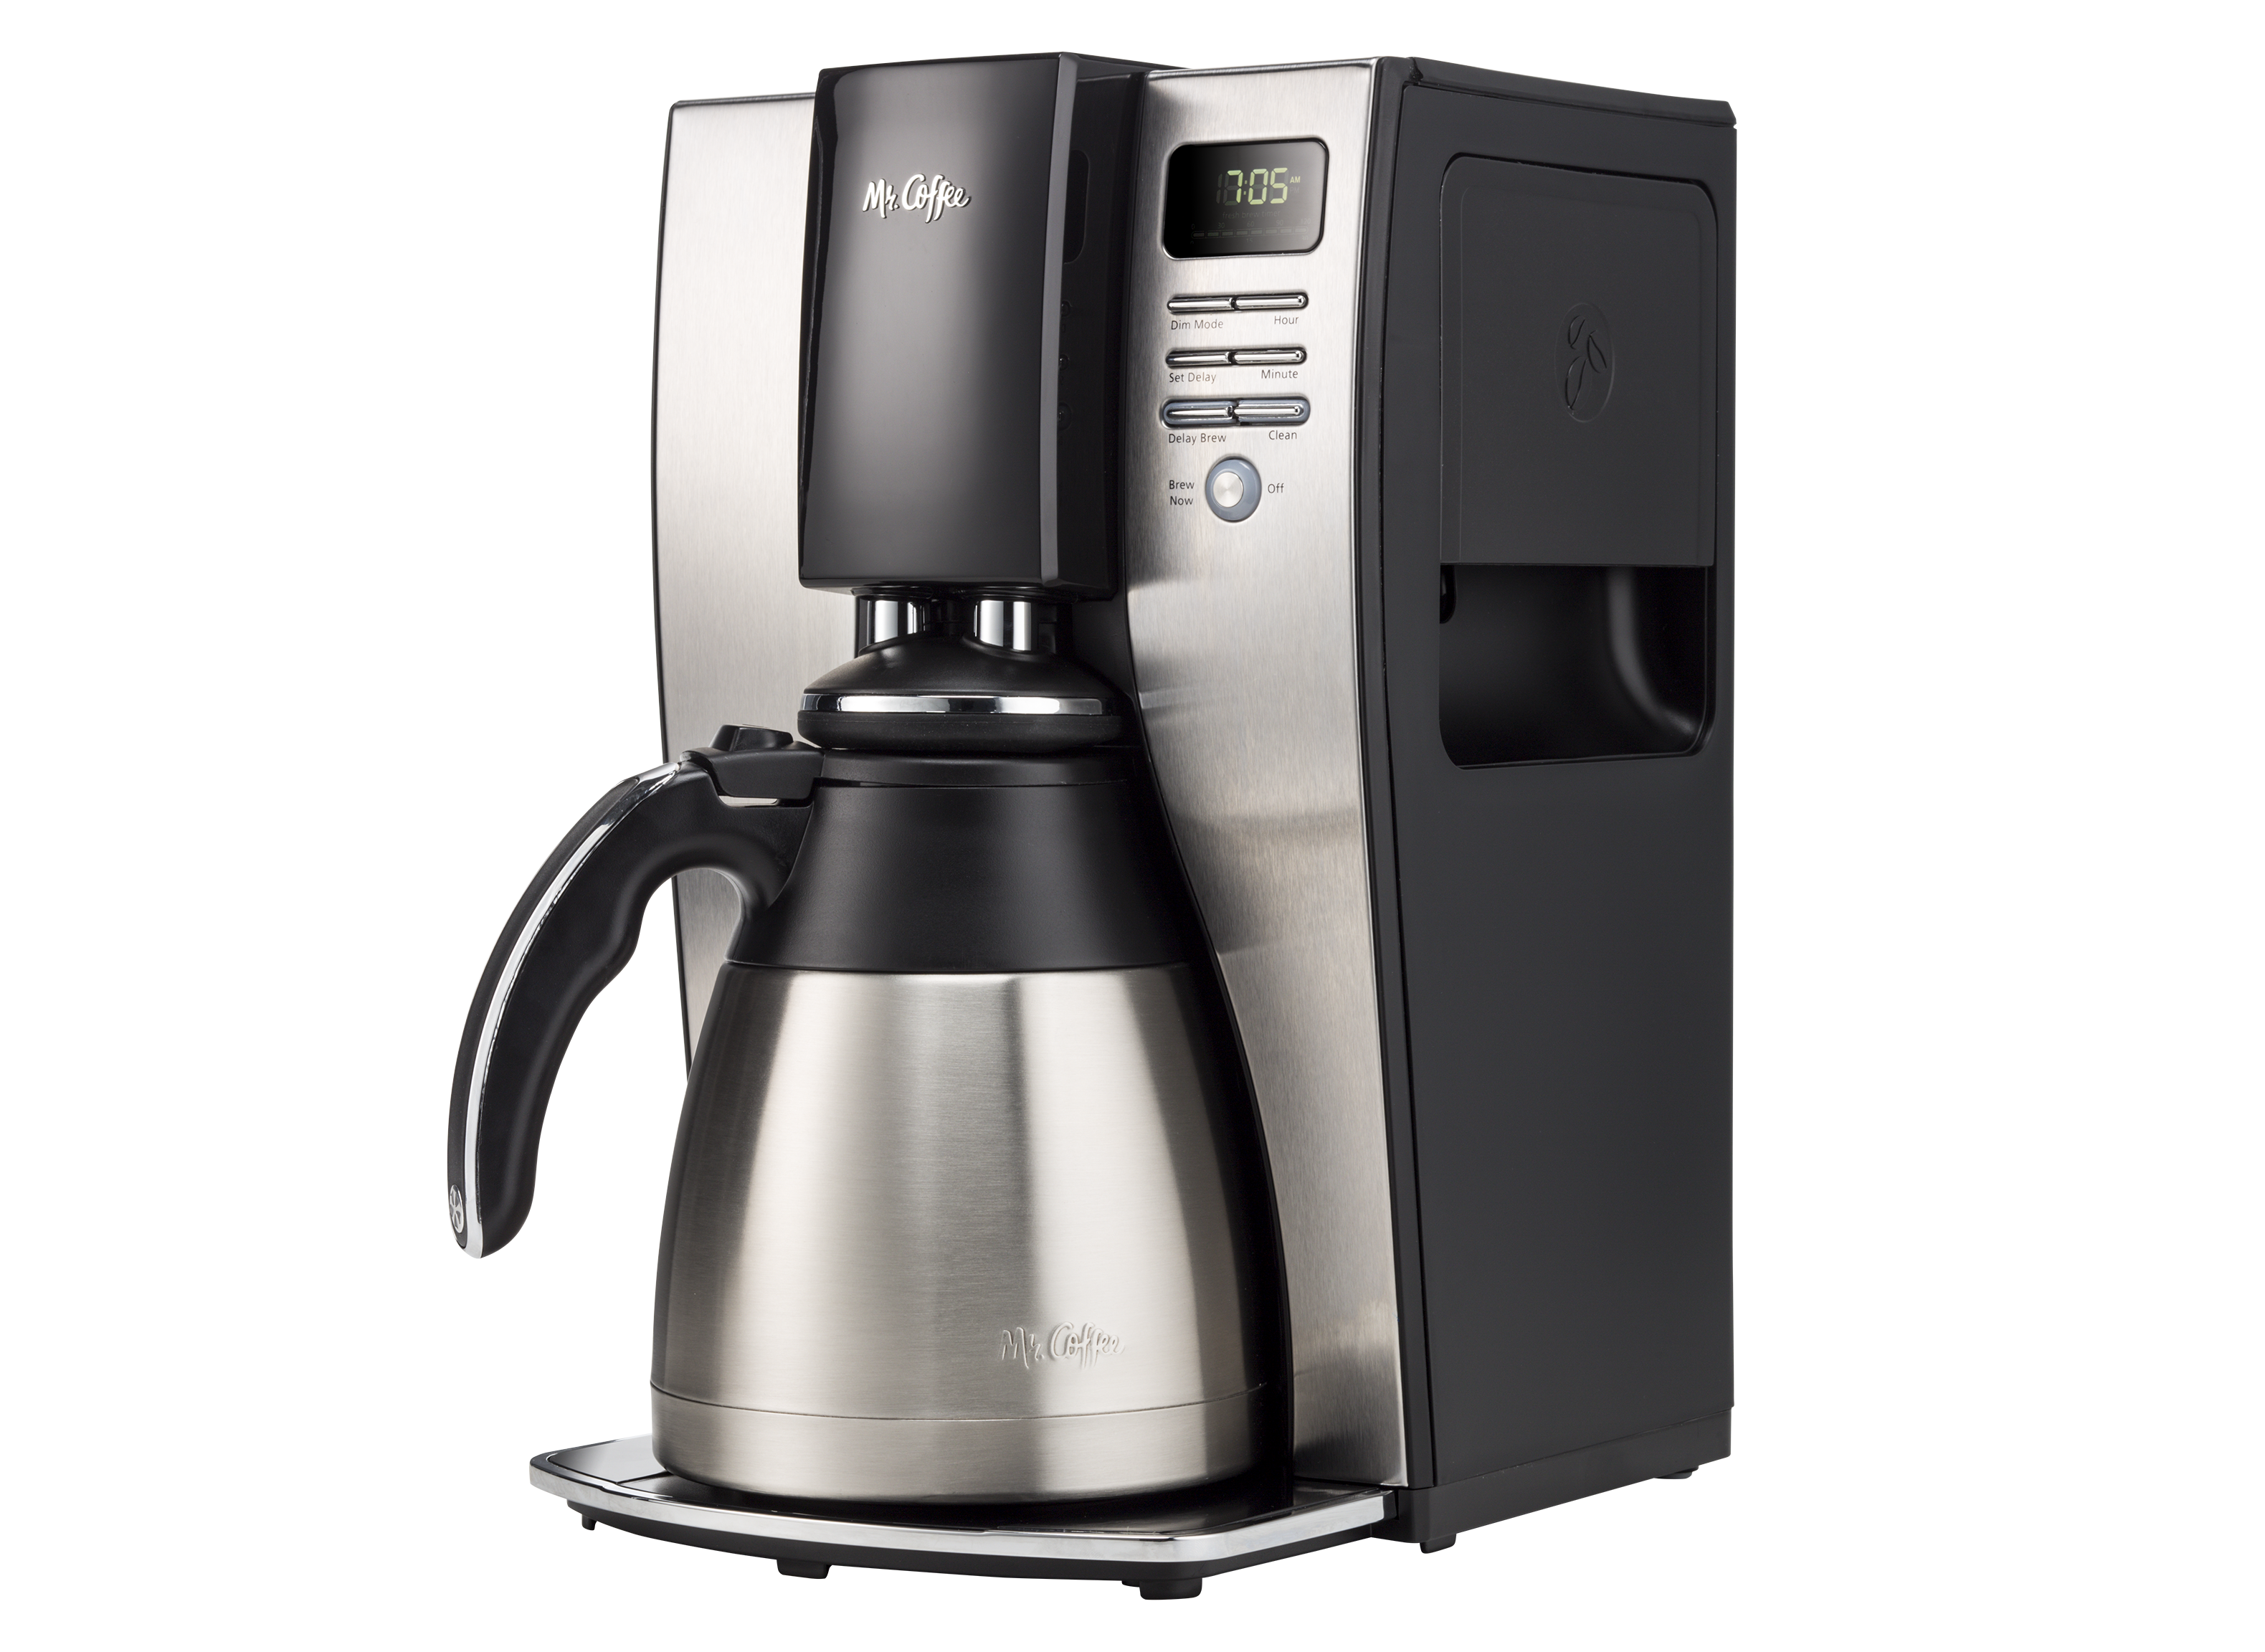 Mr. Coffee Smart Optimal Brew review: A smarter Mr. Coffee that brews  weakly and needs more connected-home links - CNET